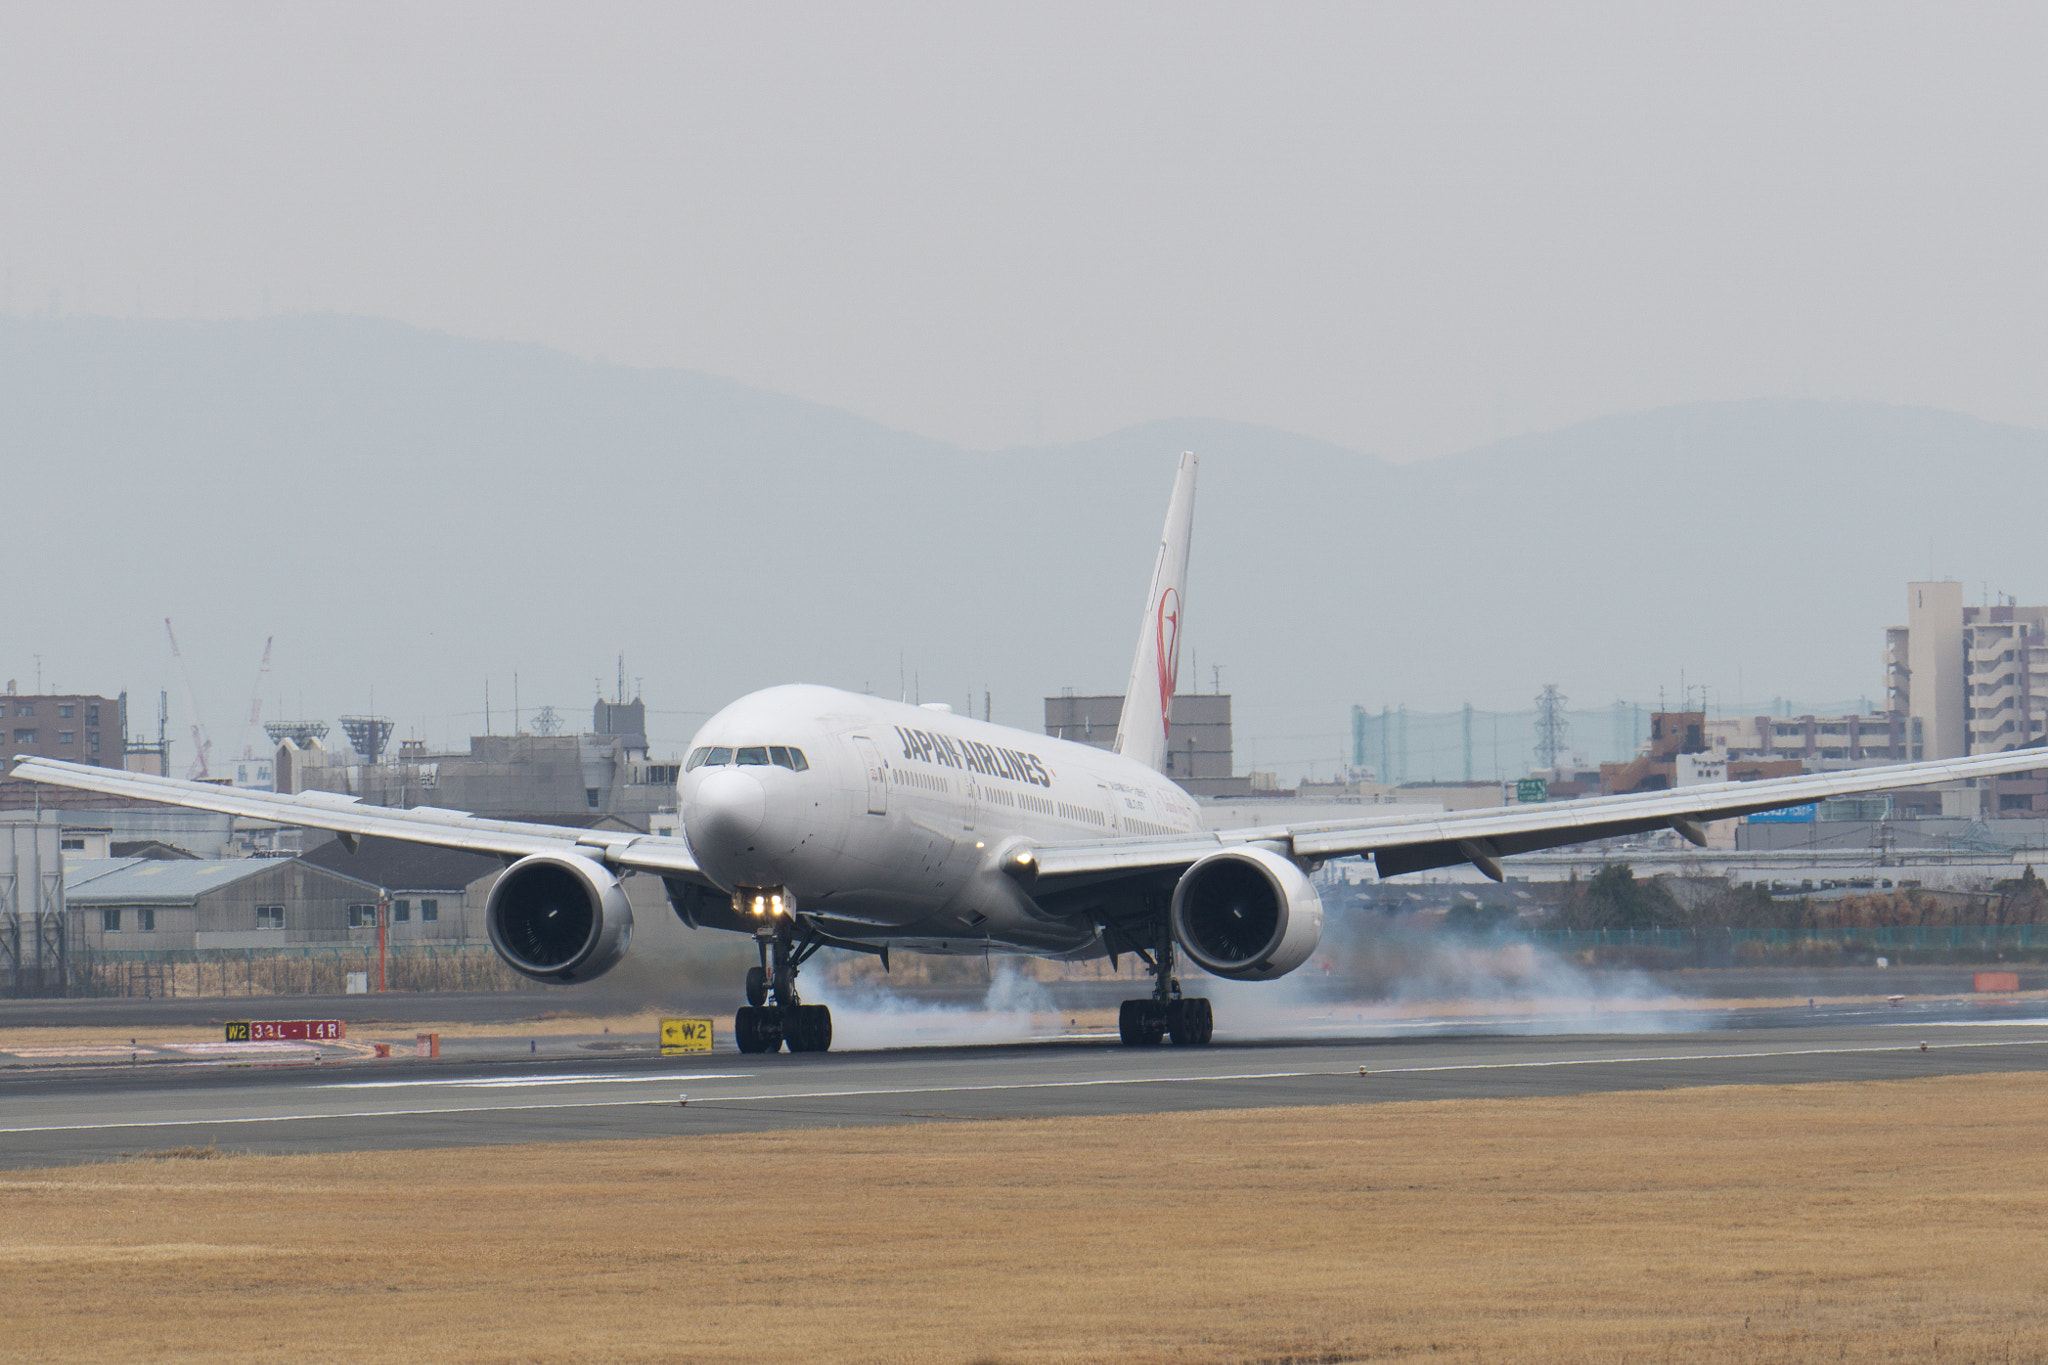 Sony a6000 sample photo. Jal 777 landing photography